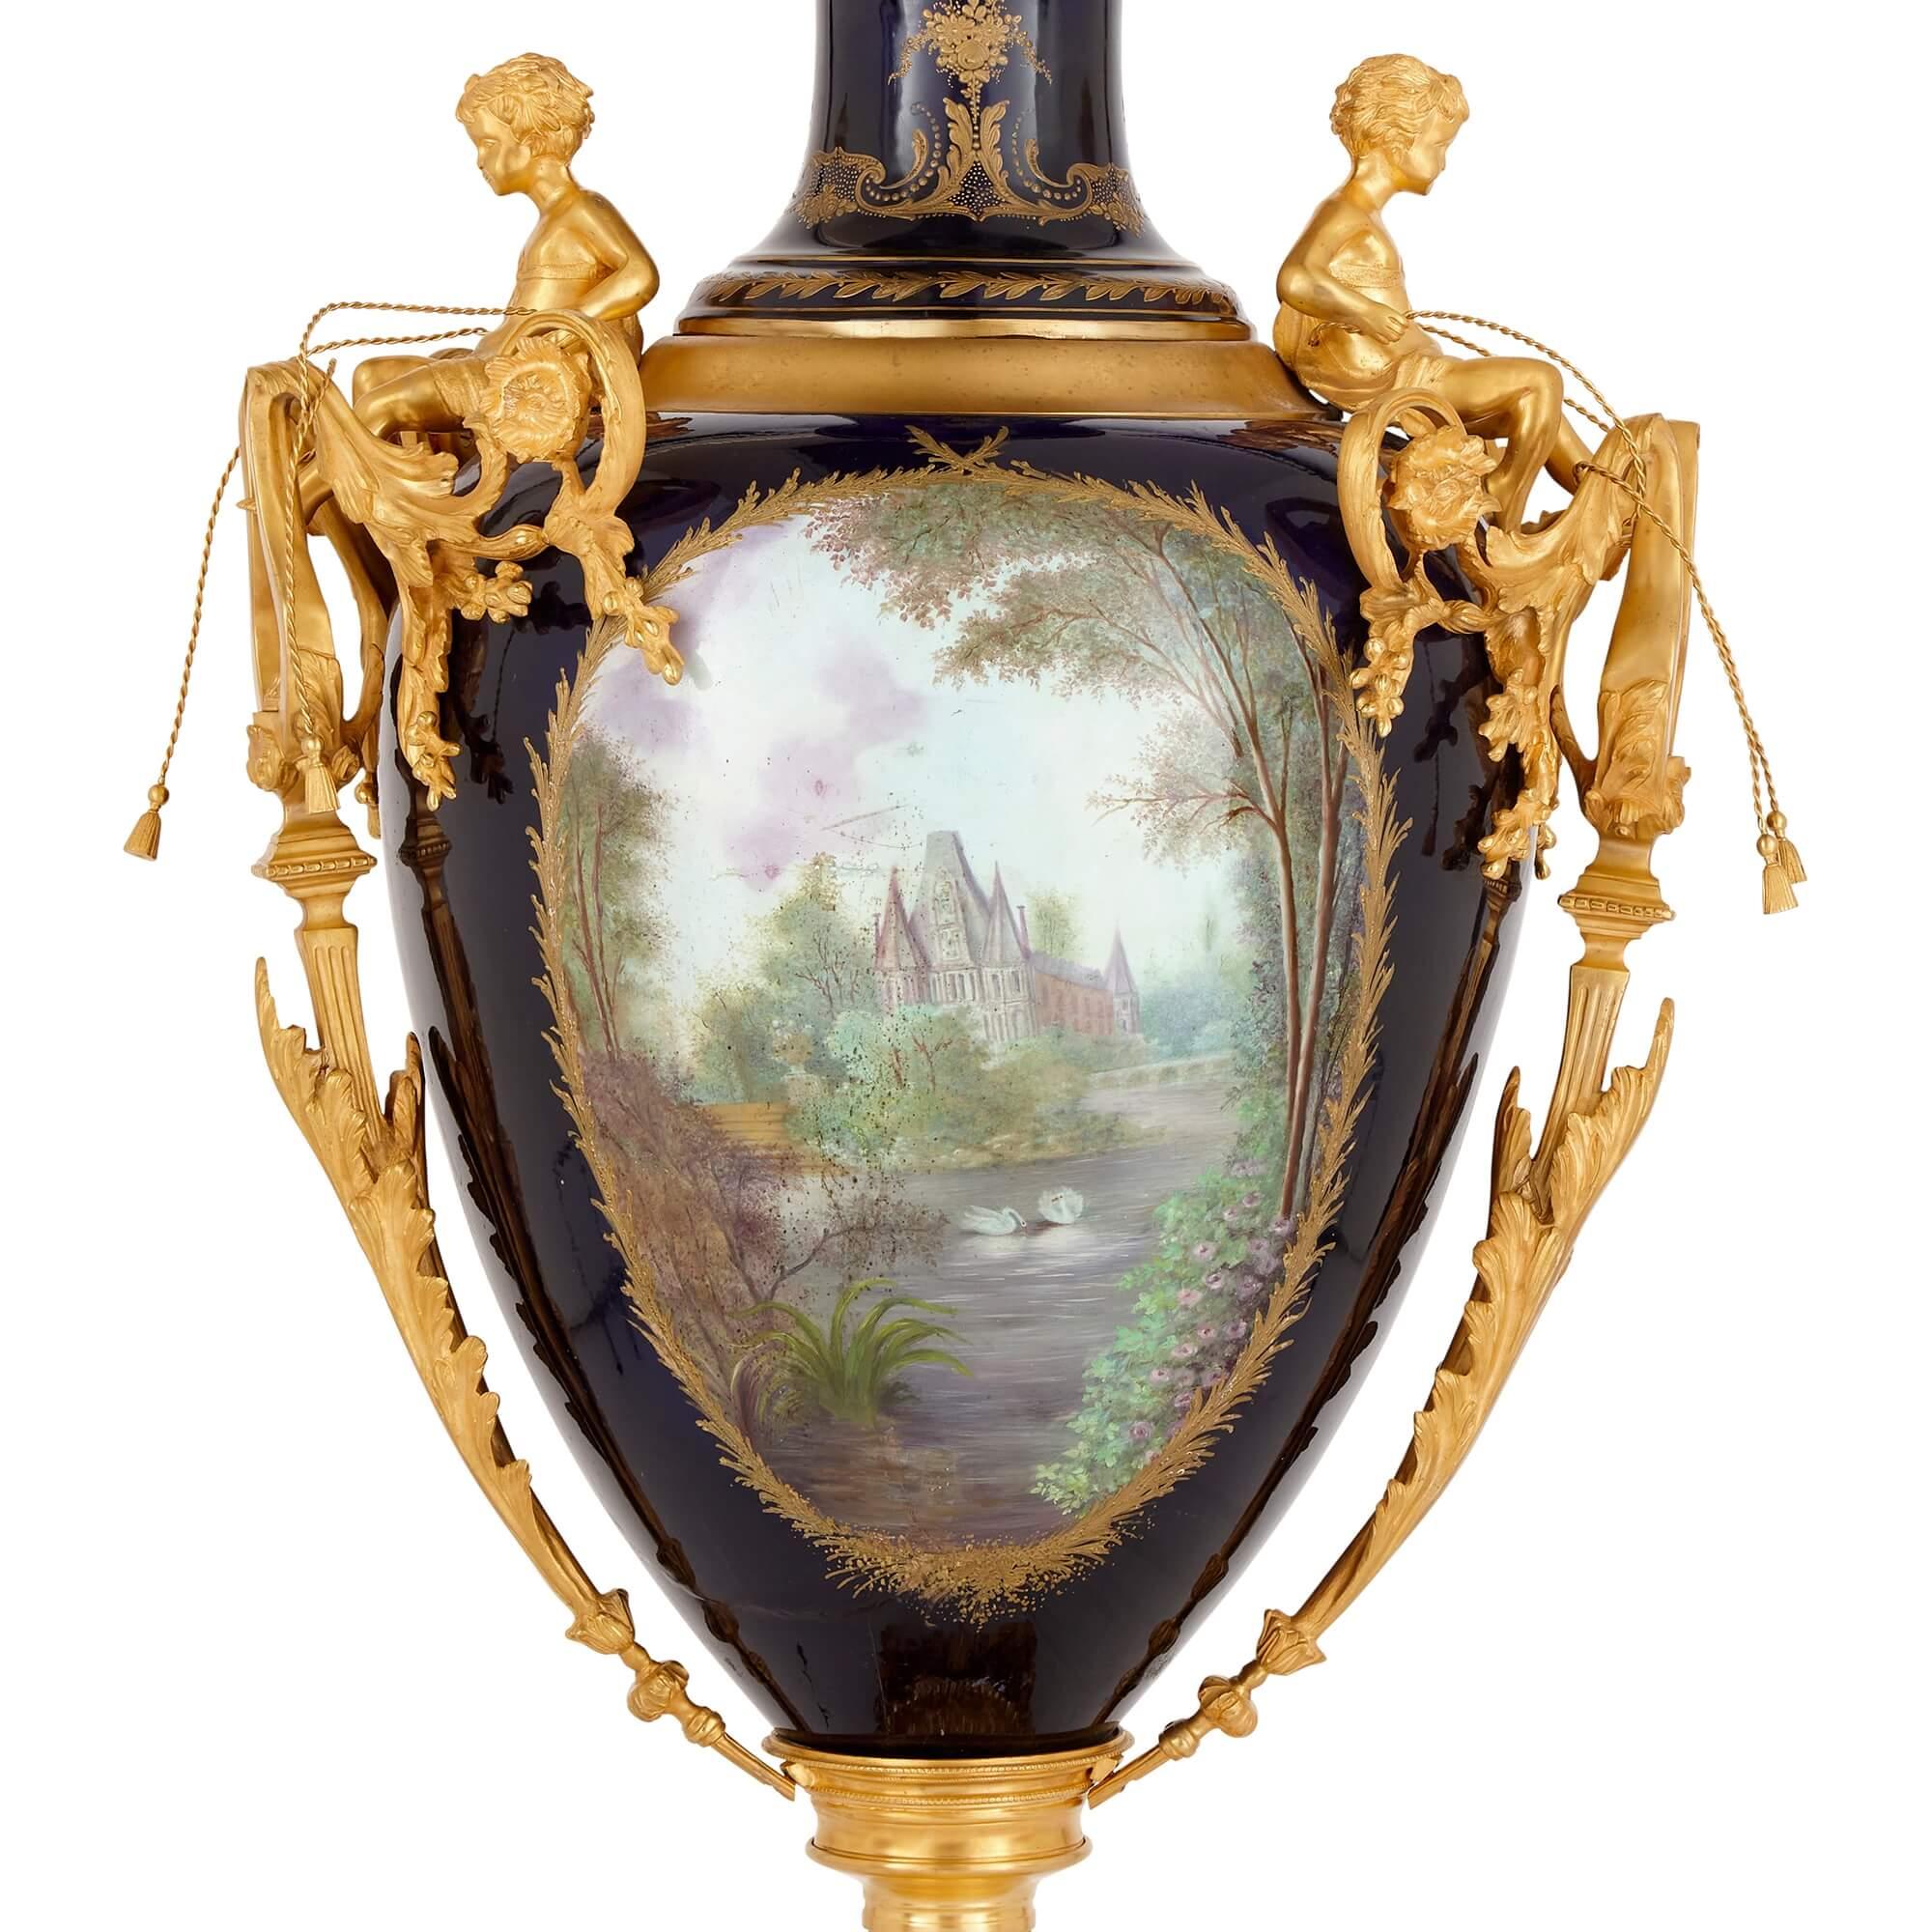 French Large Sèvres-style Gilt-Bronze Mounted Porcelain Vase with Pedestal For Sale